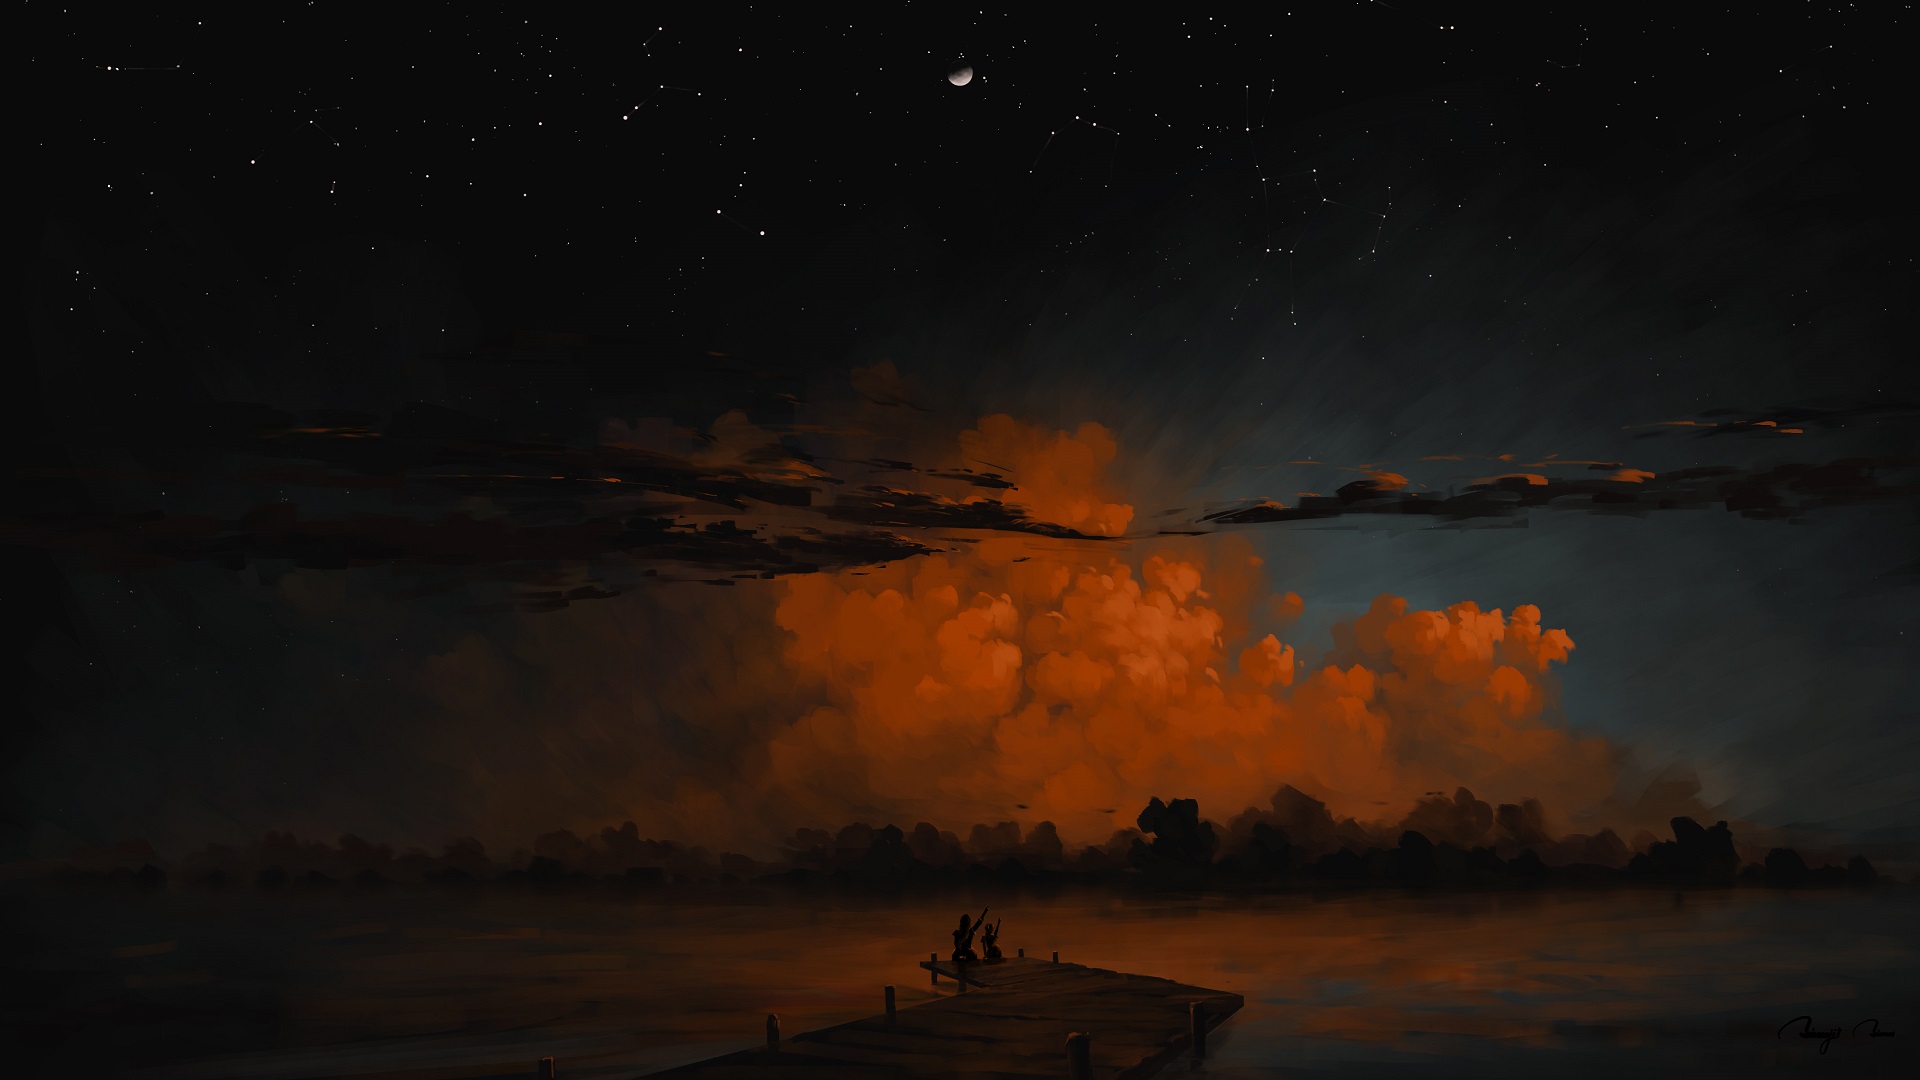 General 1920x1080 digital painting landscape couple sky clouds nightscape lake Moon BisBiswas